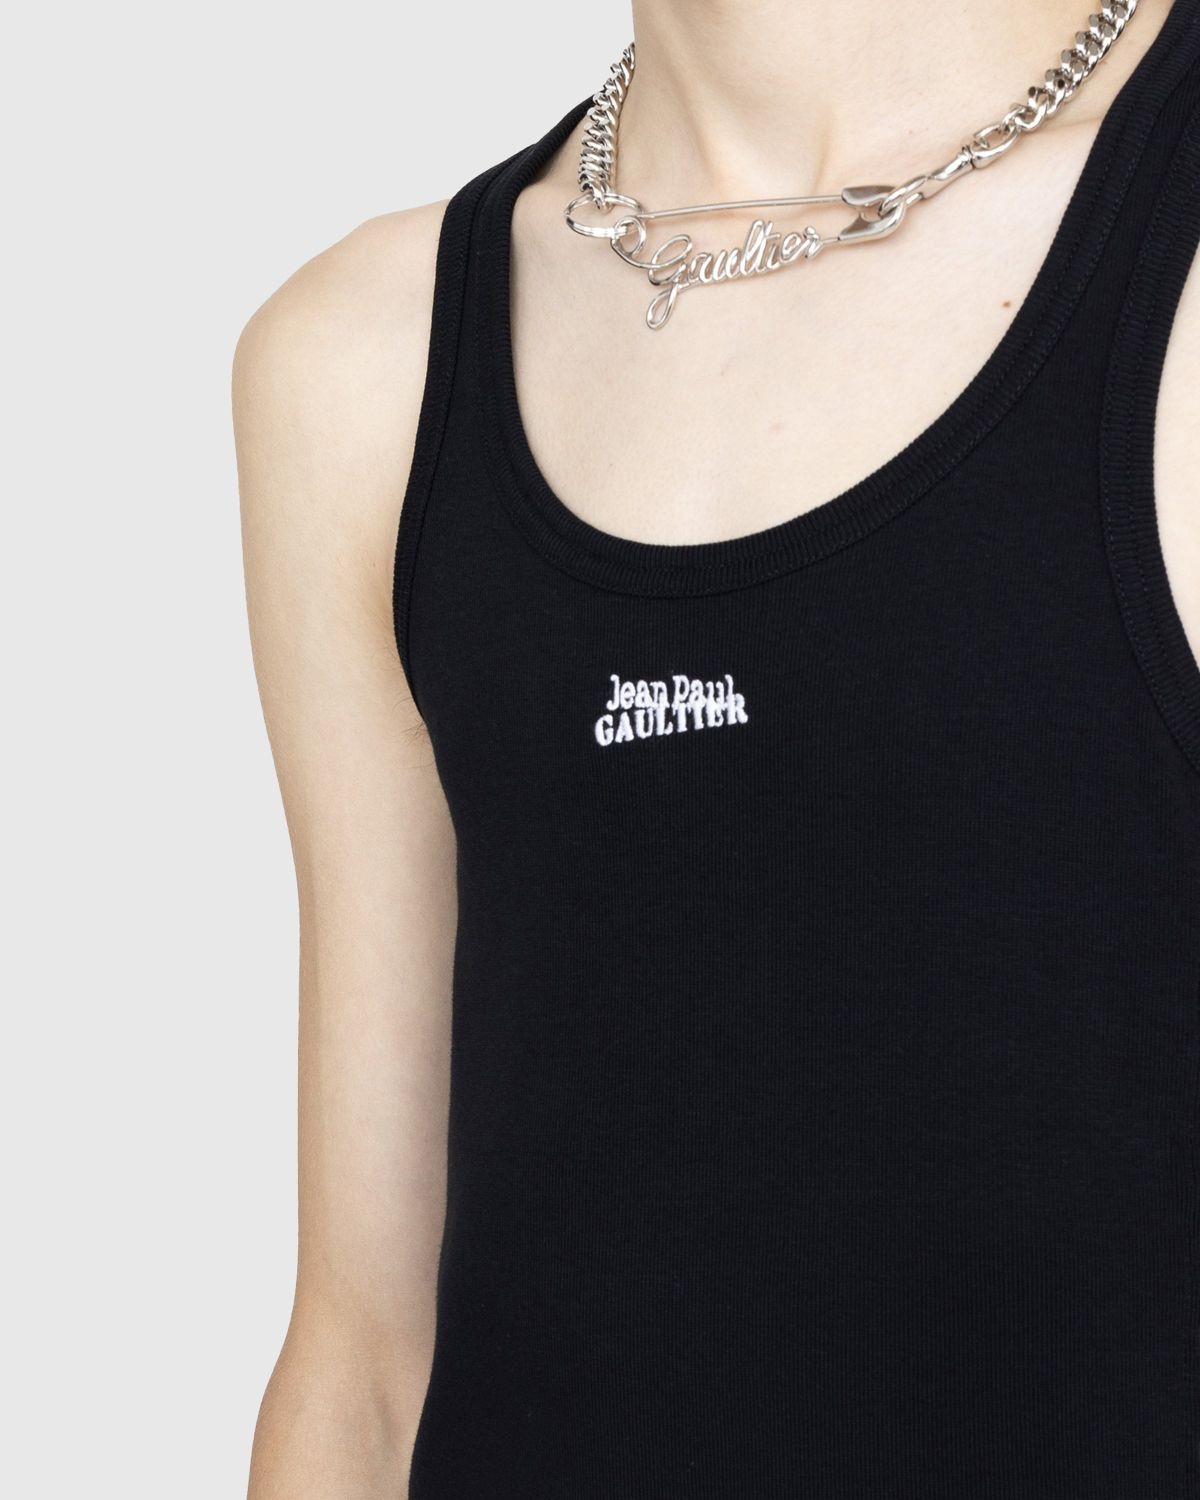 Jean Paul Gaultier – Safety Pin Gaultier Necklace Silver - 3